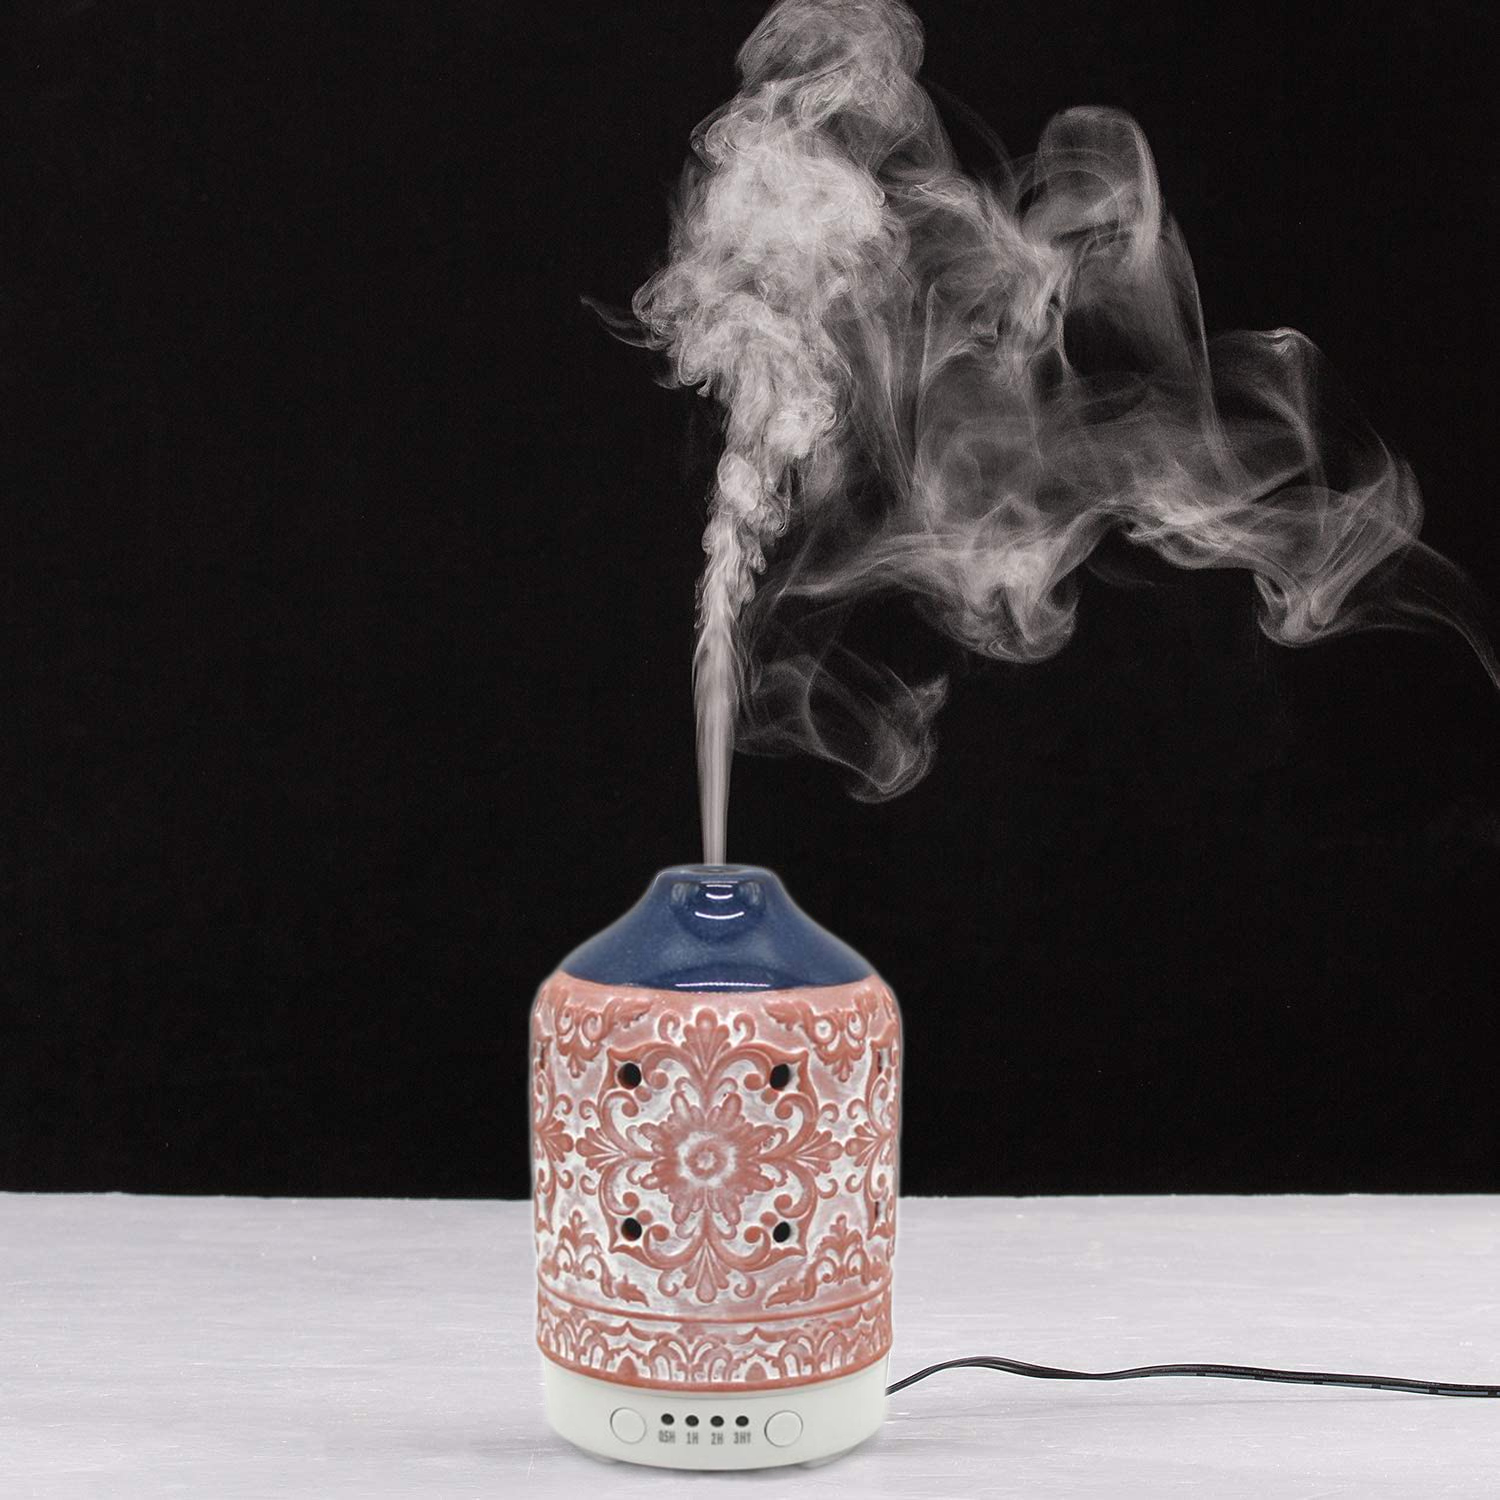 Getter 7LED Haske Diffuser 100ml Kamshi Air Mist Humidifier Ceramic Ultrasonic Essential Oil Diffuser Featured Image